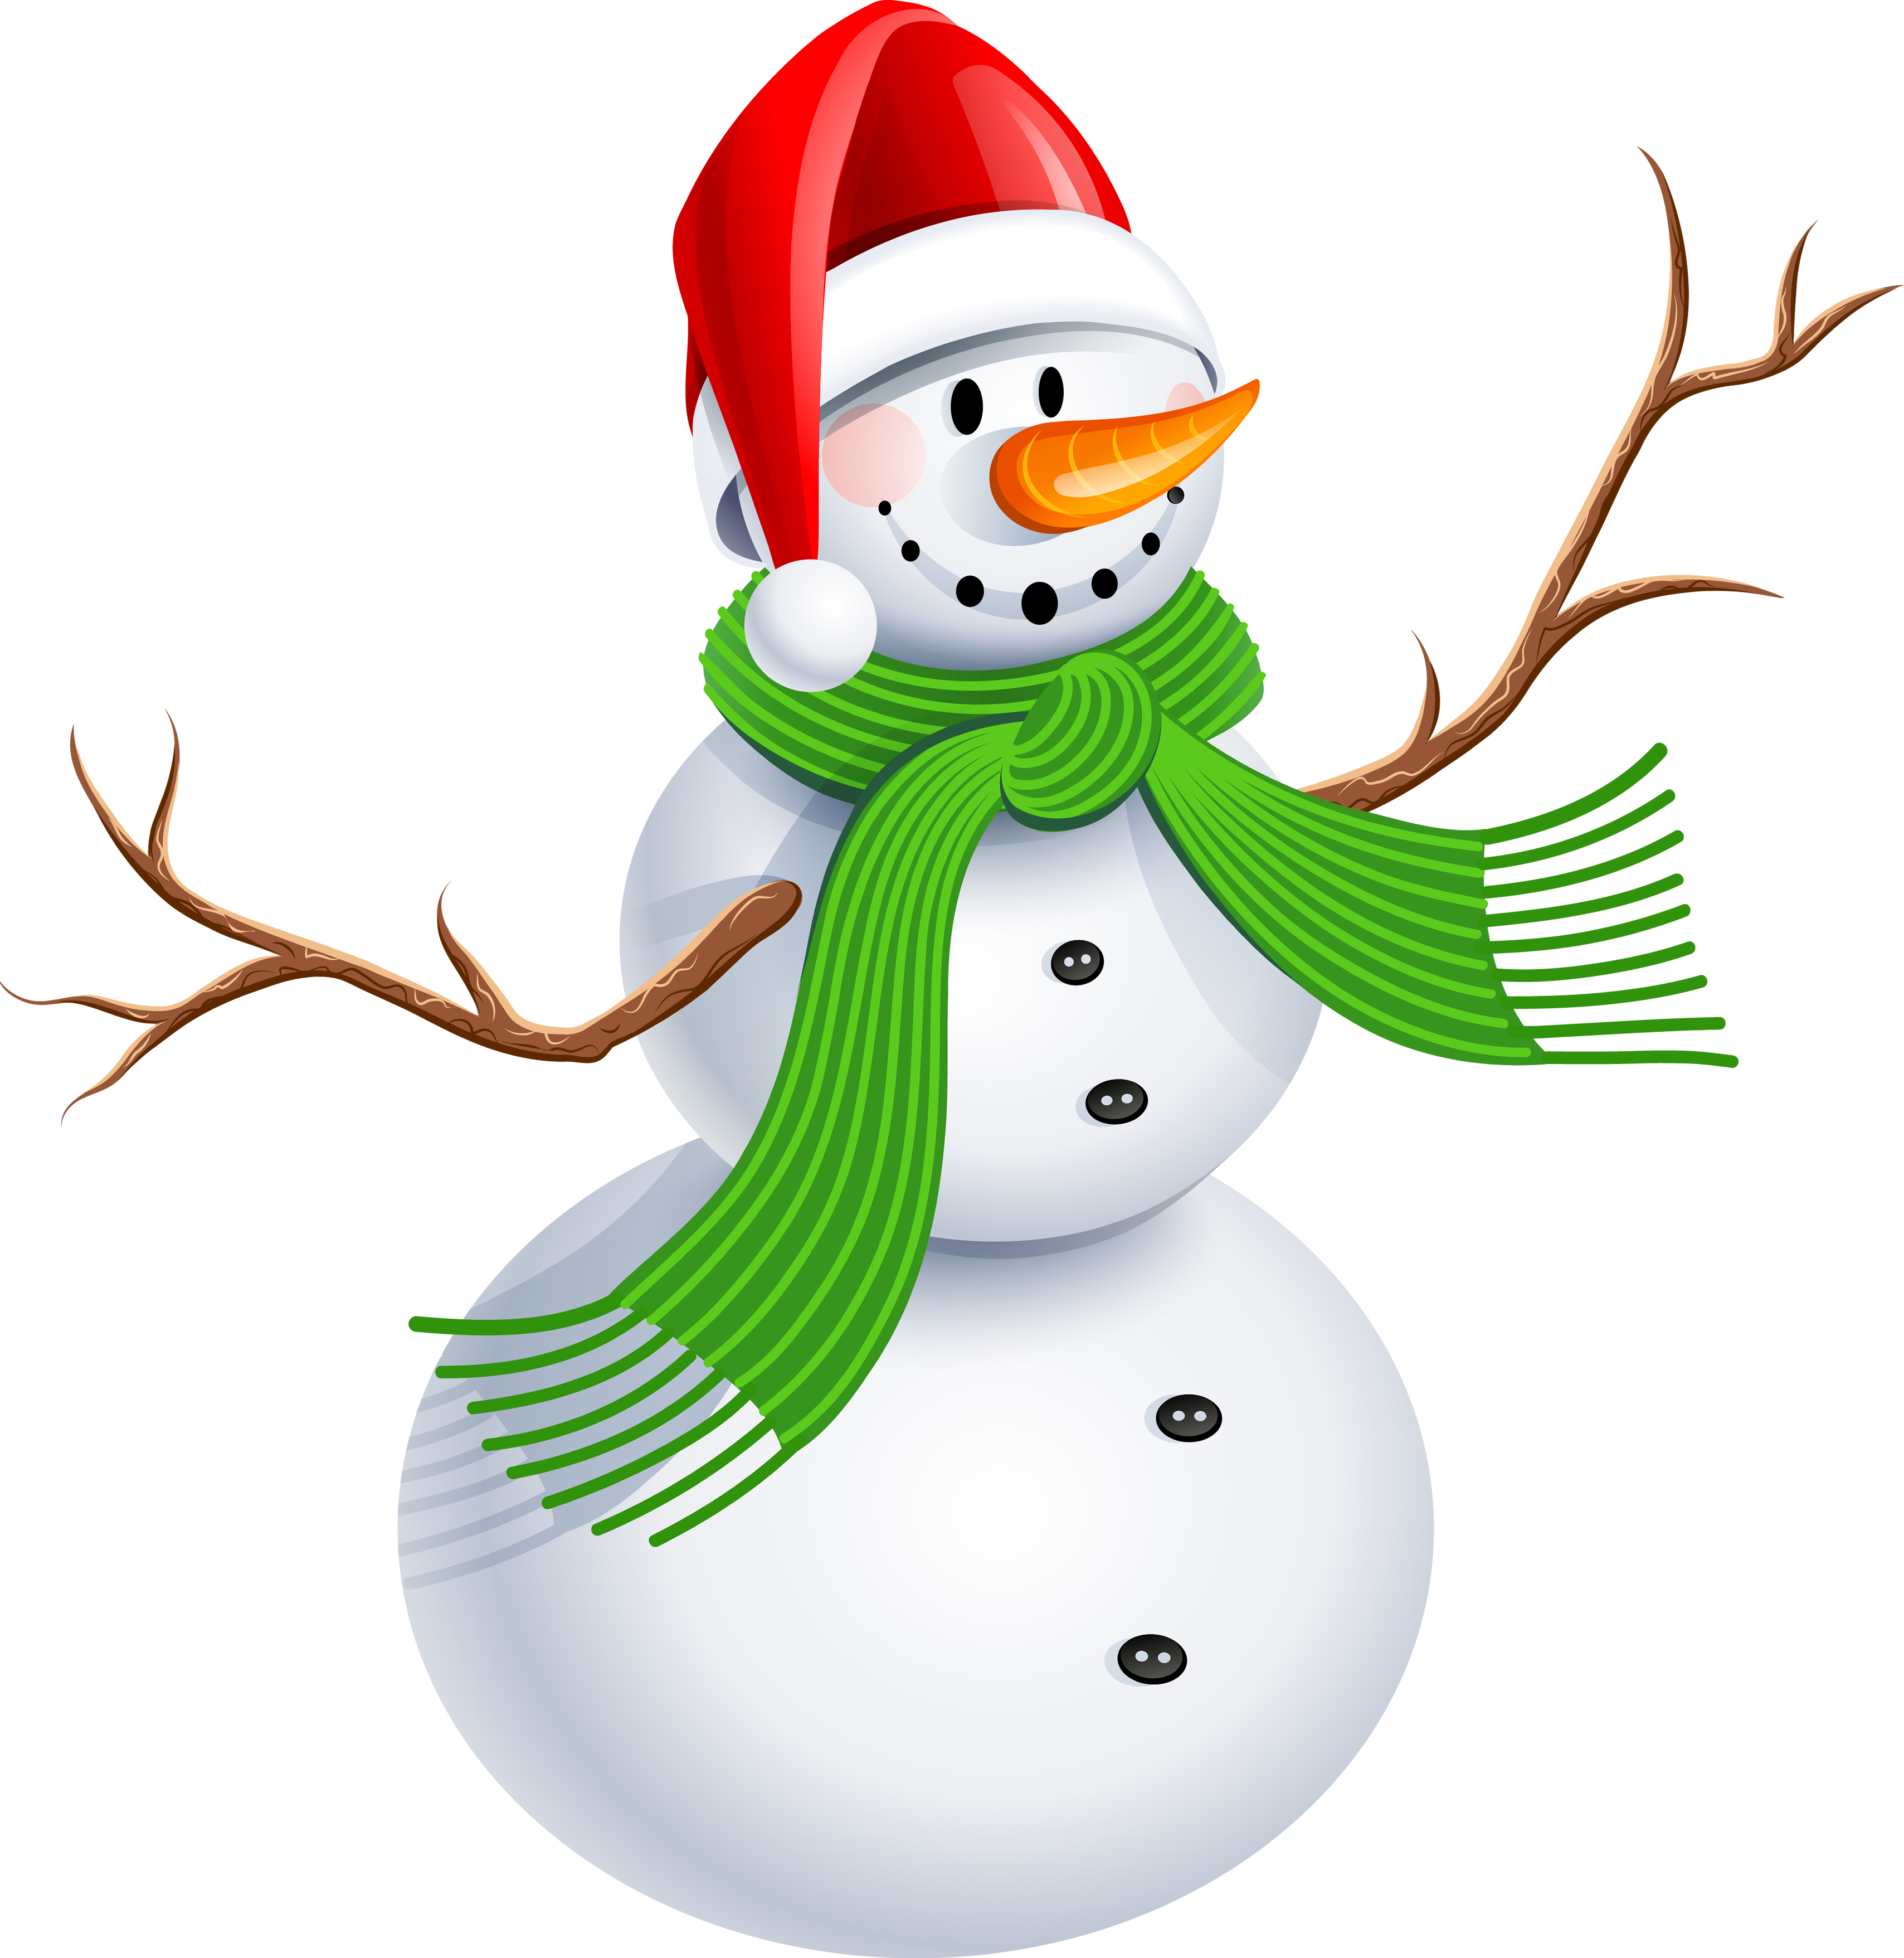 Snowman PNG images free download.